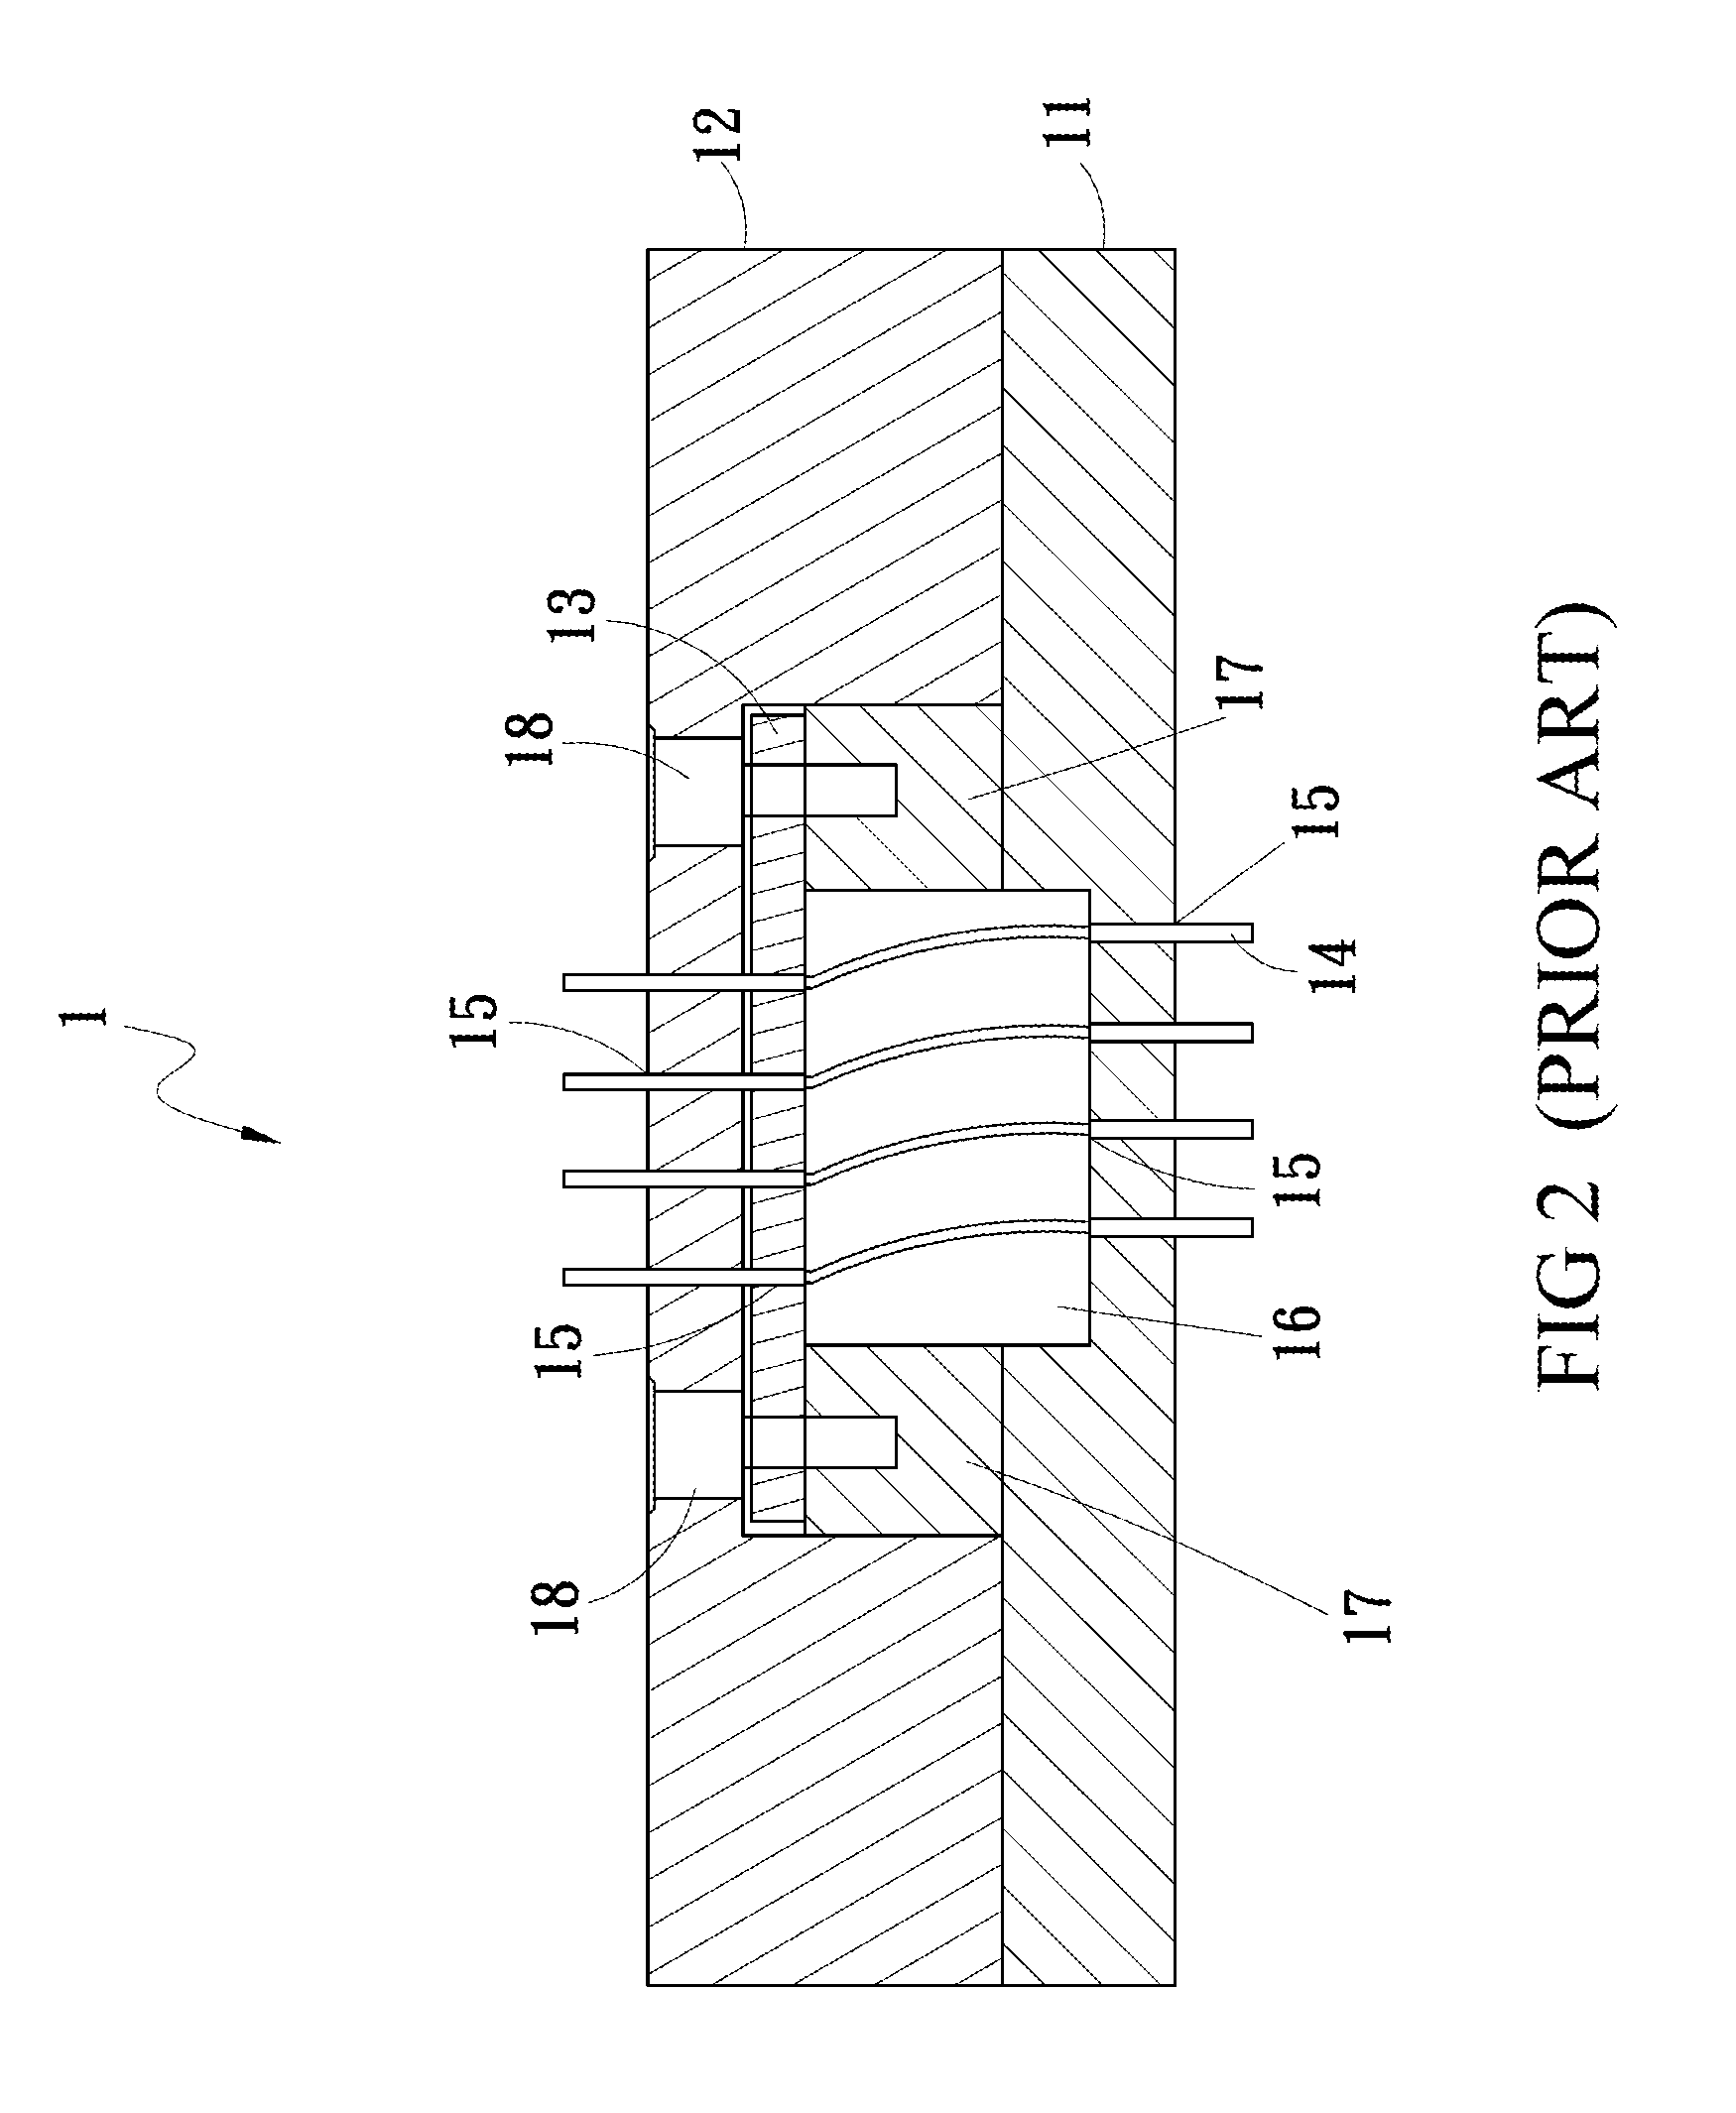 Probe card, maintenance apparatus and method for the same